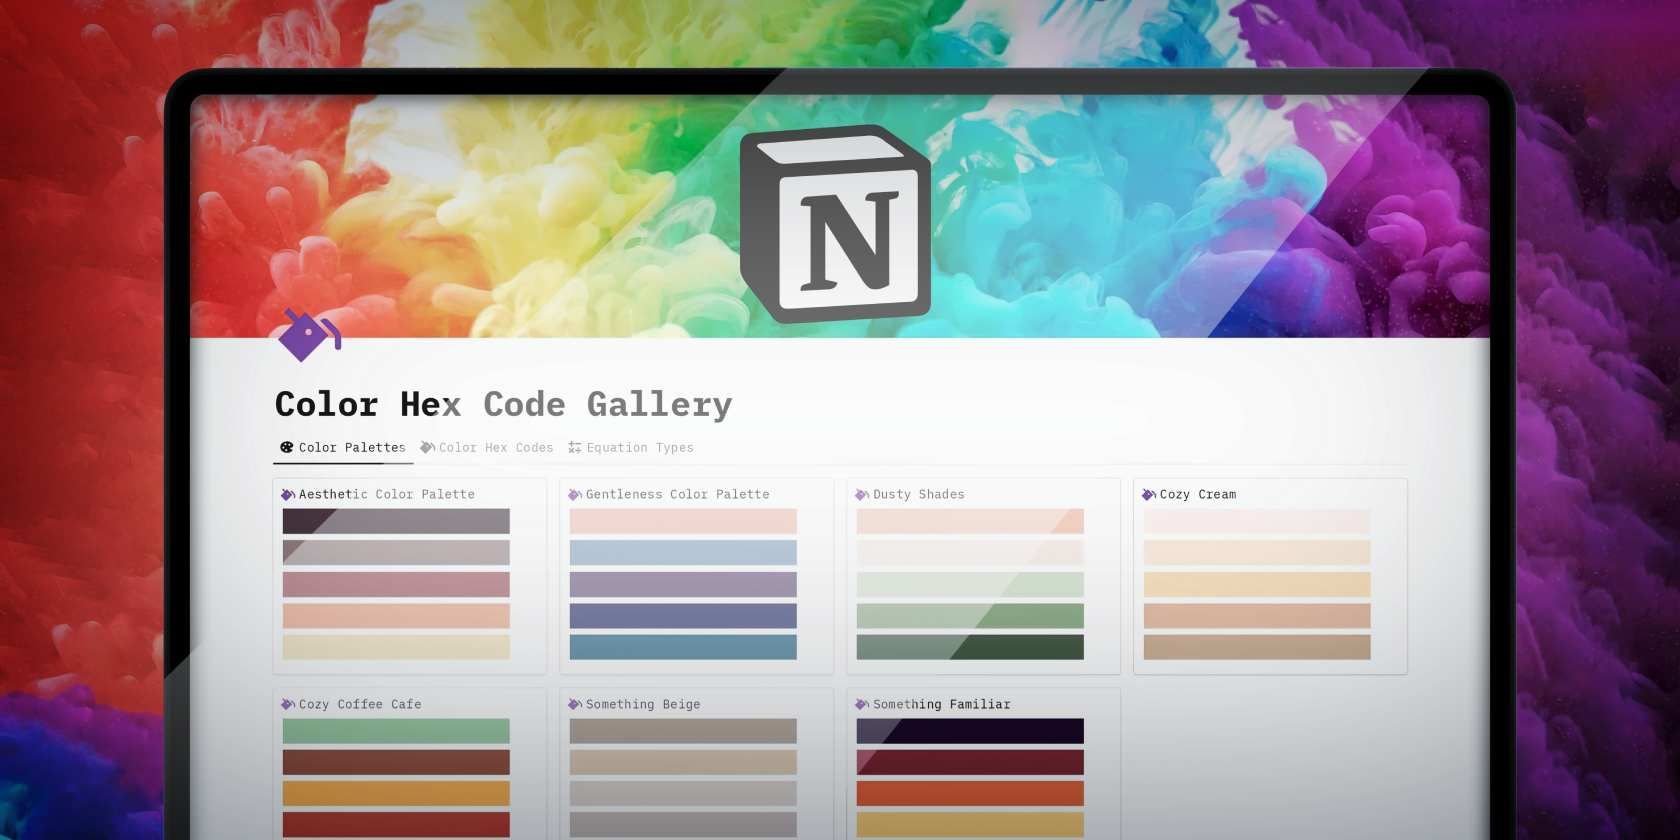 A laptop showing the Notion logo and “Color Hex Code Gallery interface” on a colorful background